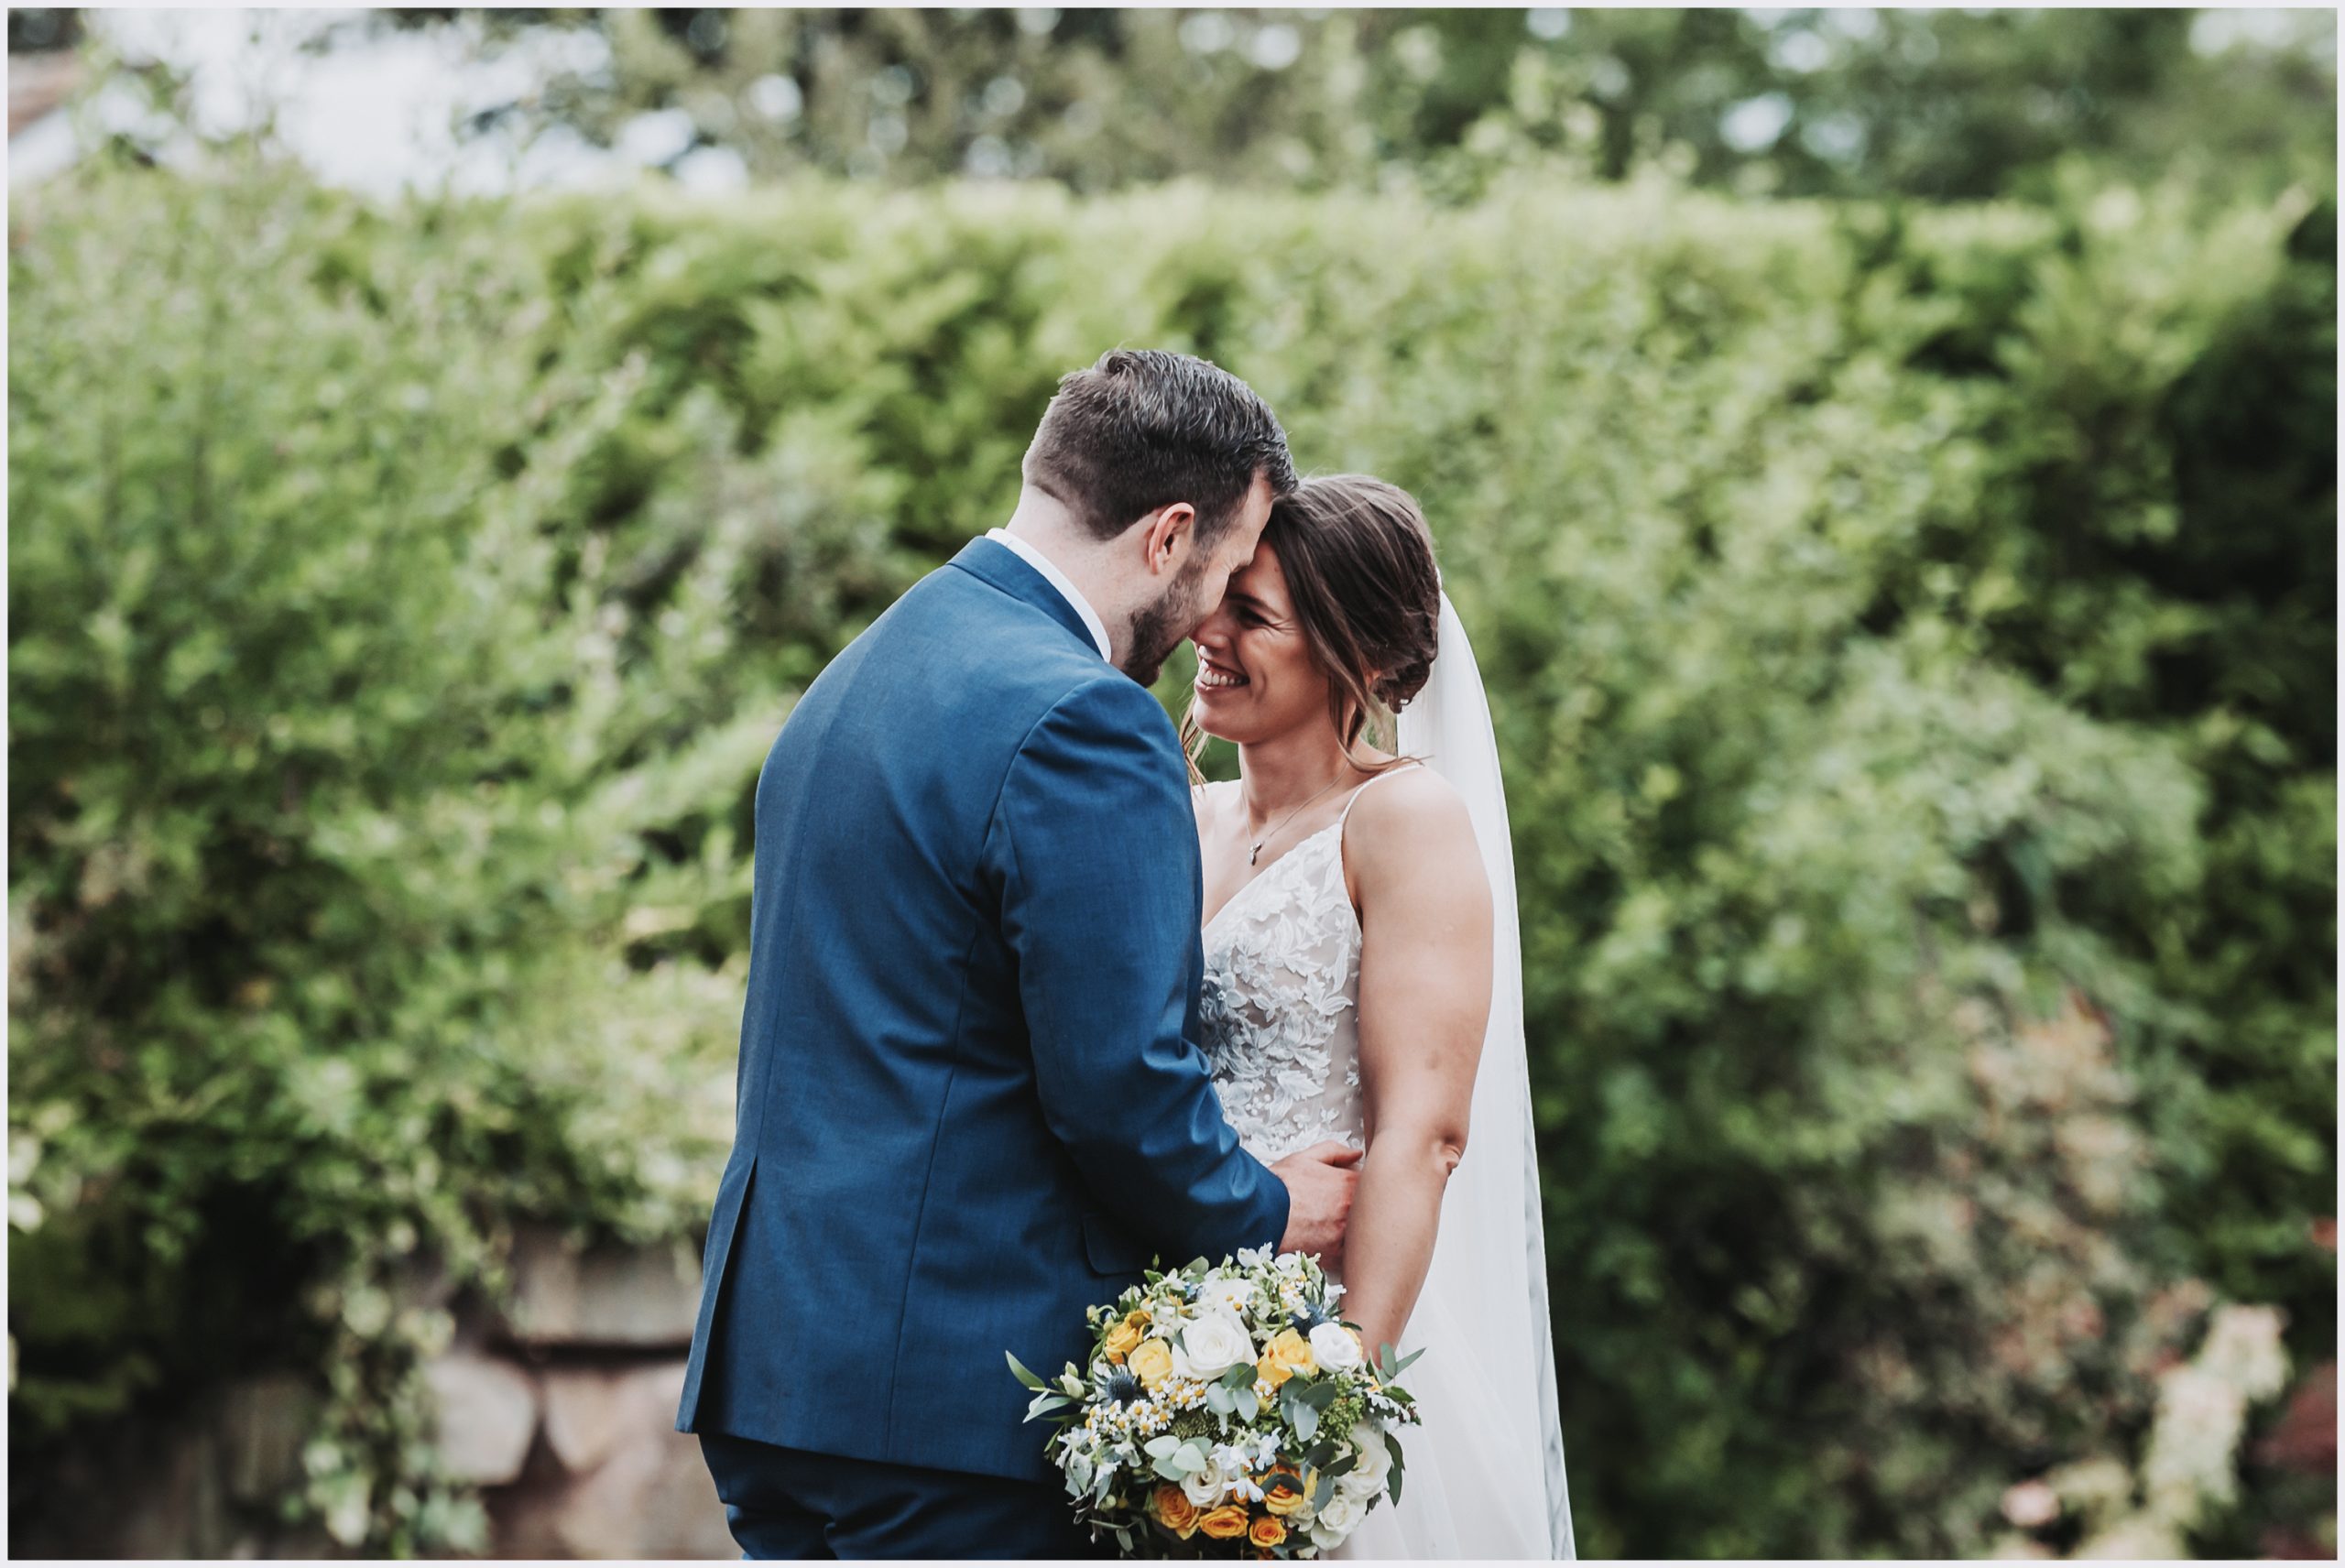 A gorgeous bride smiles at her husband during their bride and groom photoshoot at The Grosvenor Pulford Hotel and Spa.  Image captured by Chester wedding photographer Helena Jayne Photography a Chester based wedding photographer